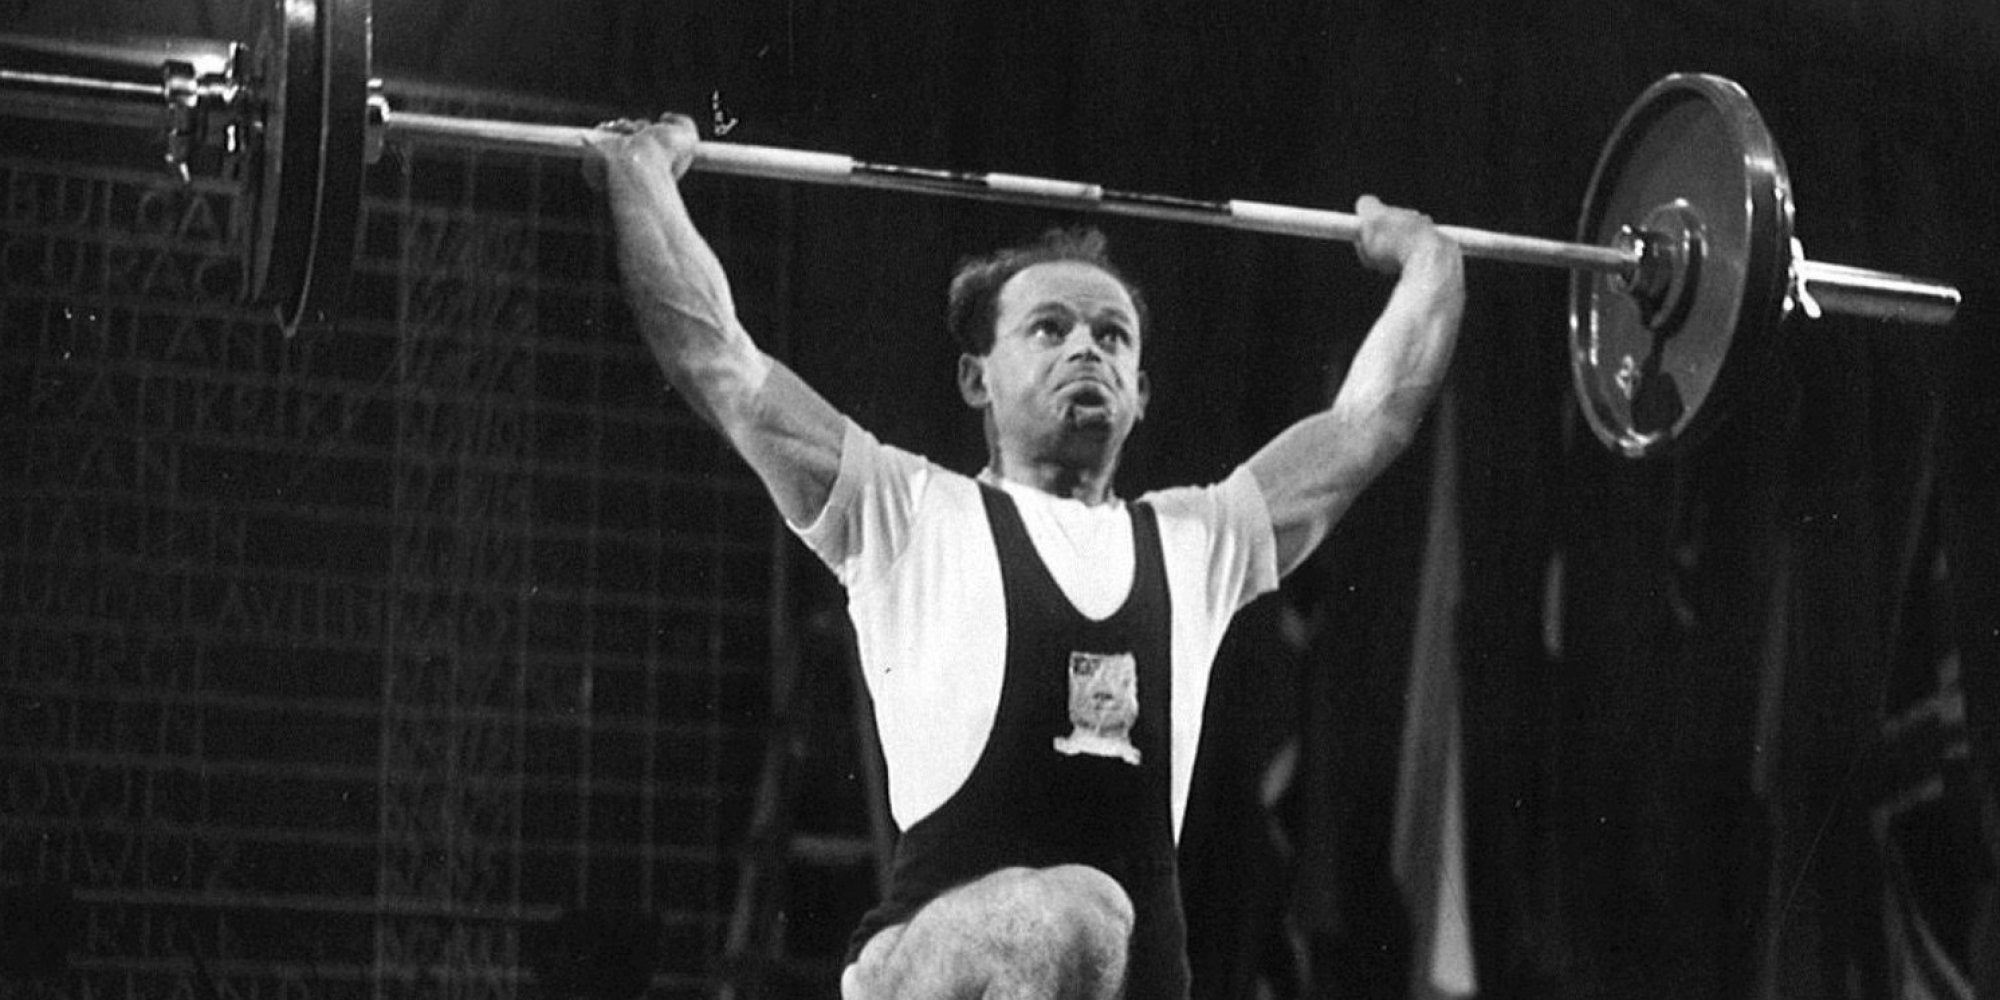 I persevered, trained hard and ended up being captain of the British weightlifting team at the 1956 Olympics in Melbourne, and again at the 1960 Olympics in Rome